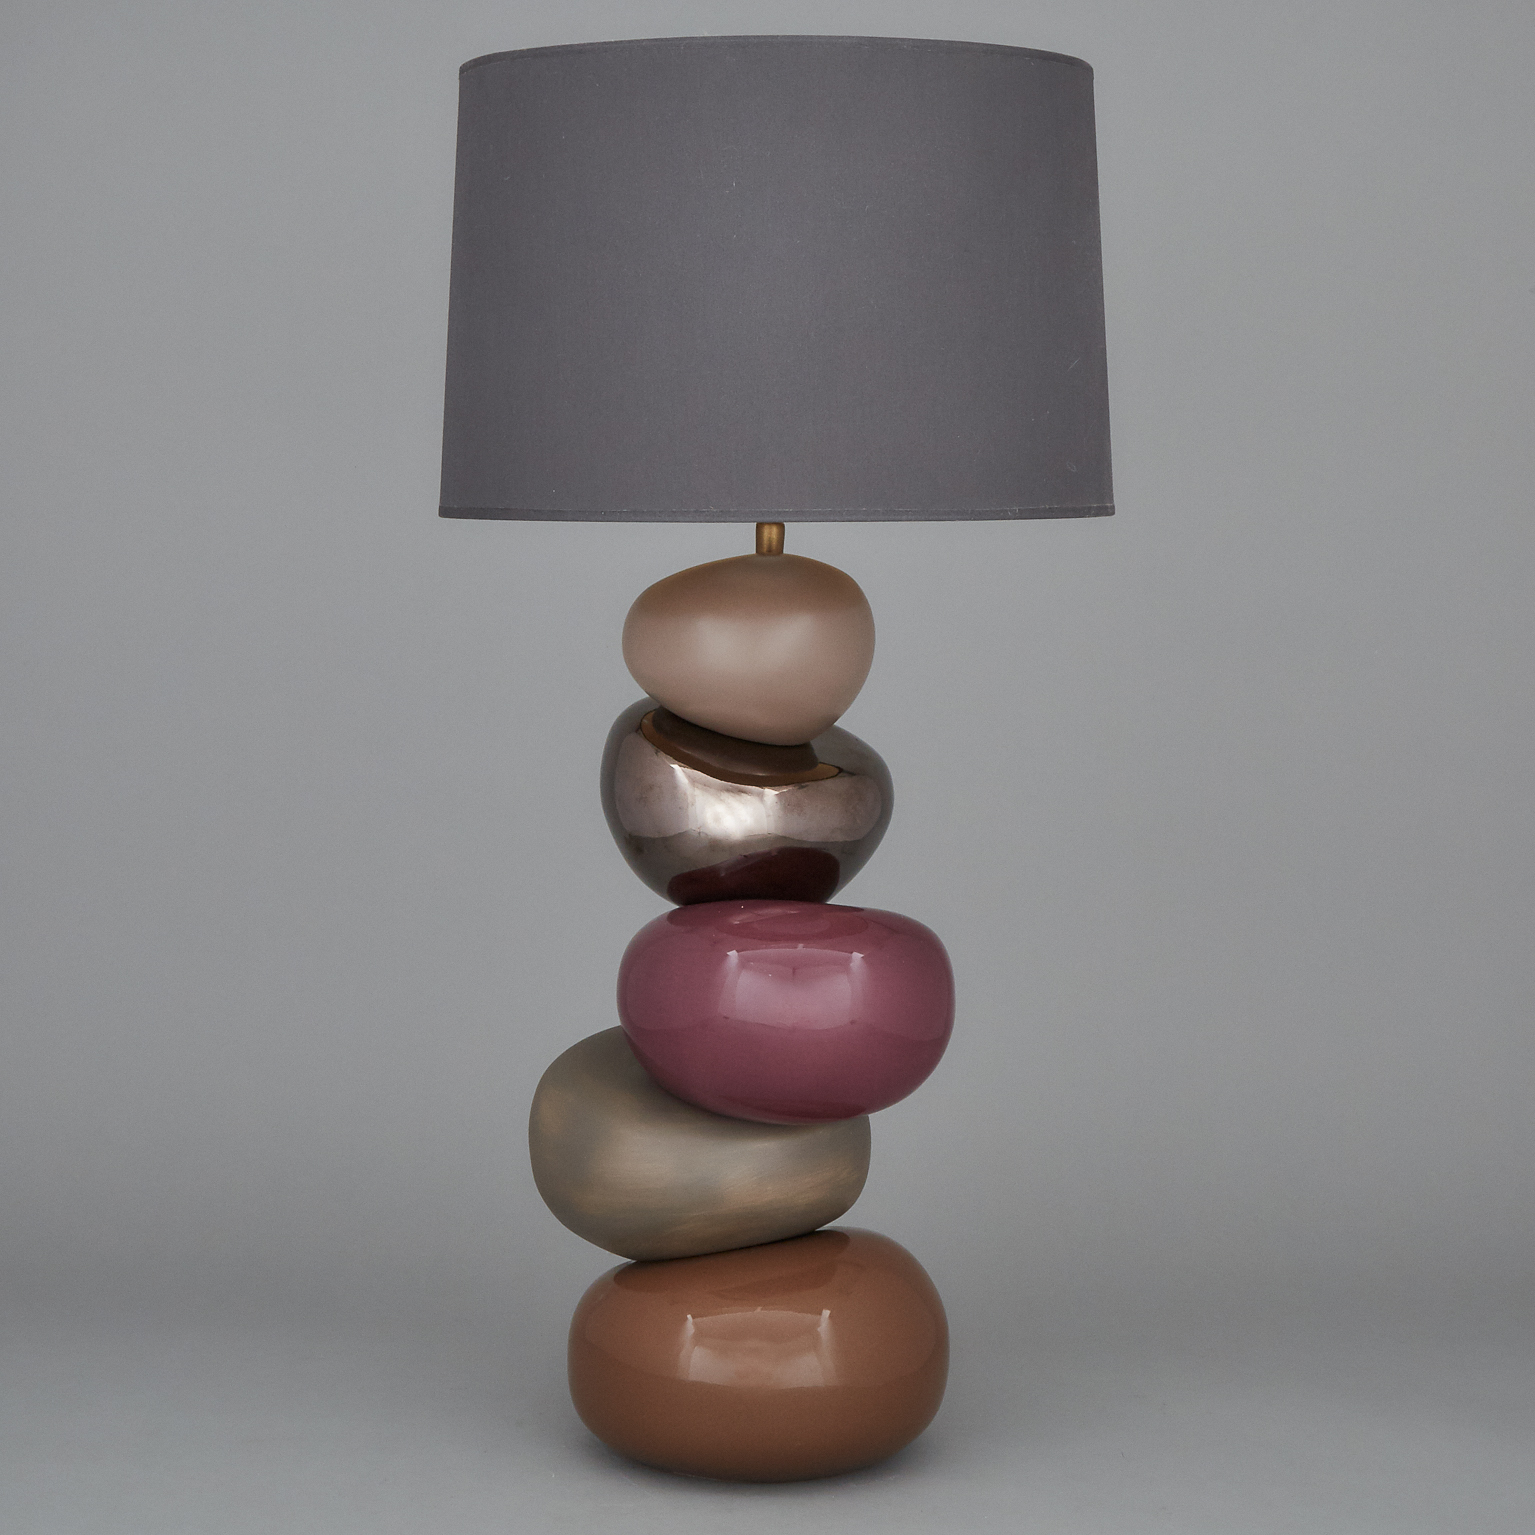 French 'Madame Galet Jr.' Contemporary Ceramic Table Lamp, c.2000